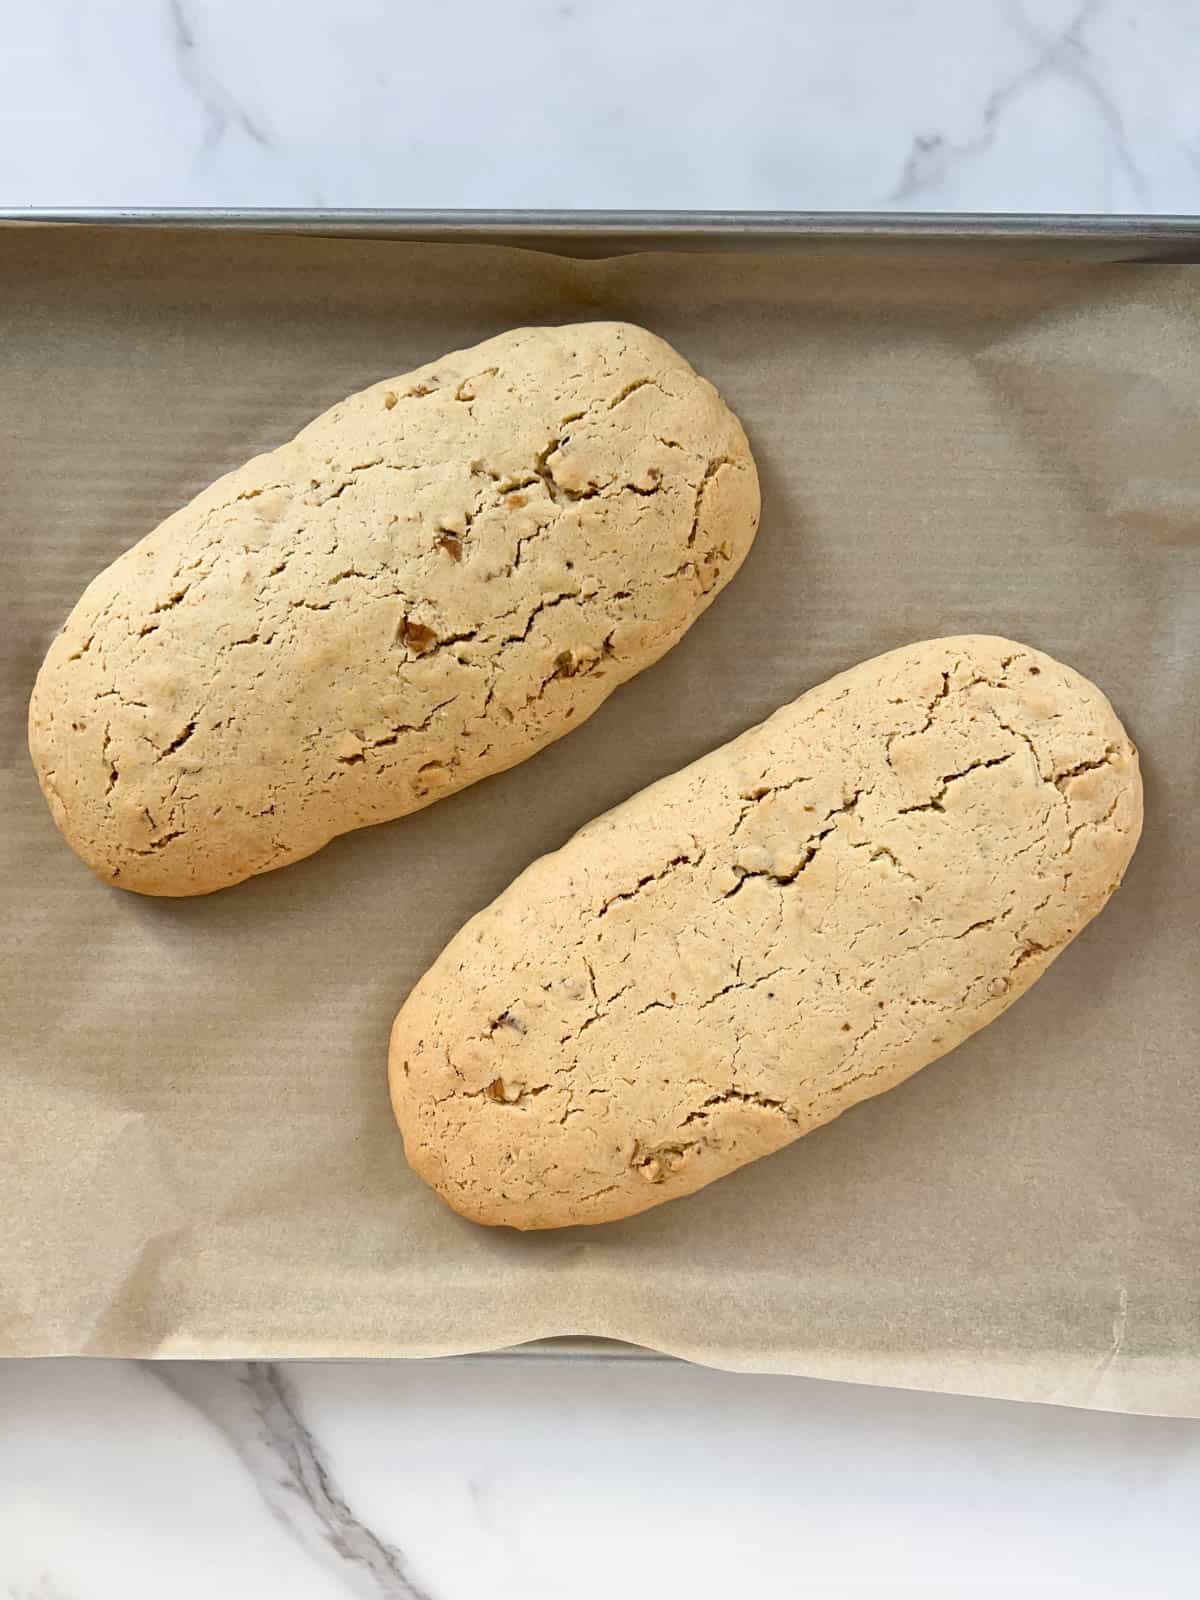 Two baked loaves of walnut biscotti on a metal baking sheet lined with parchment paper.